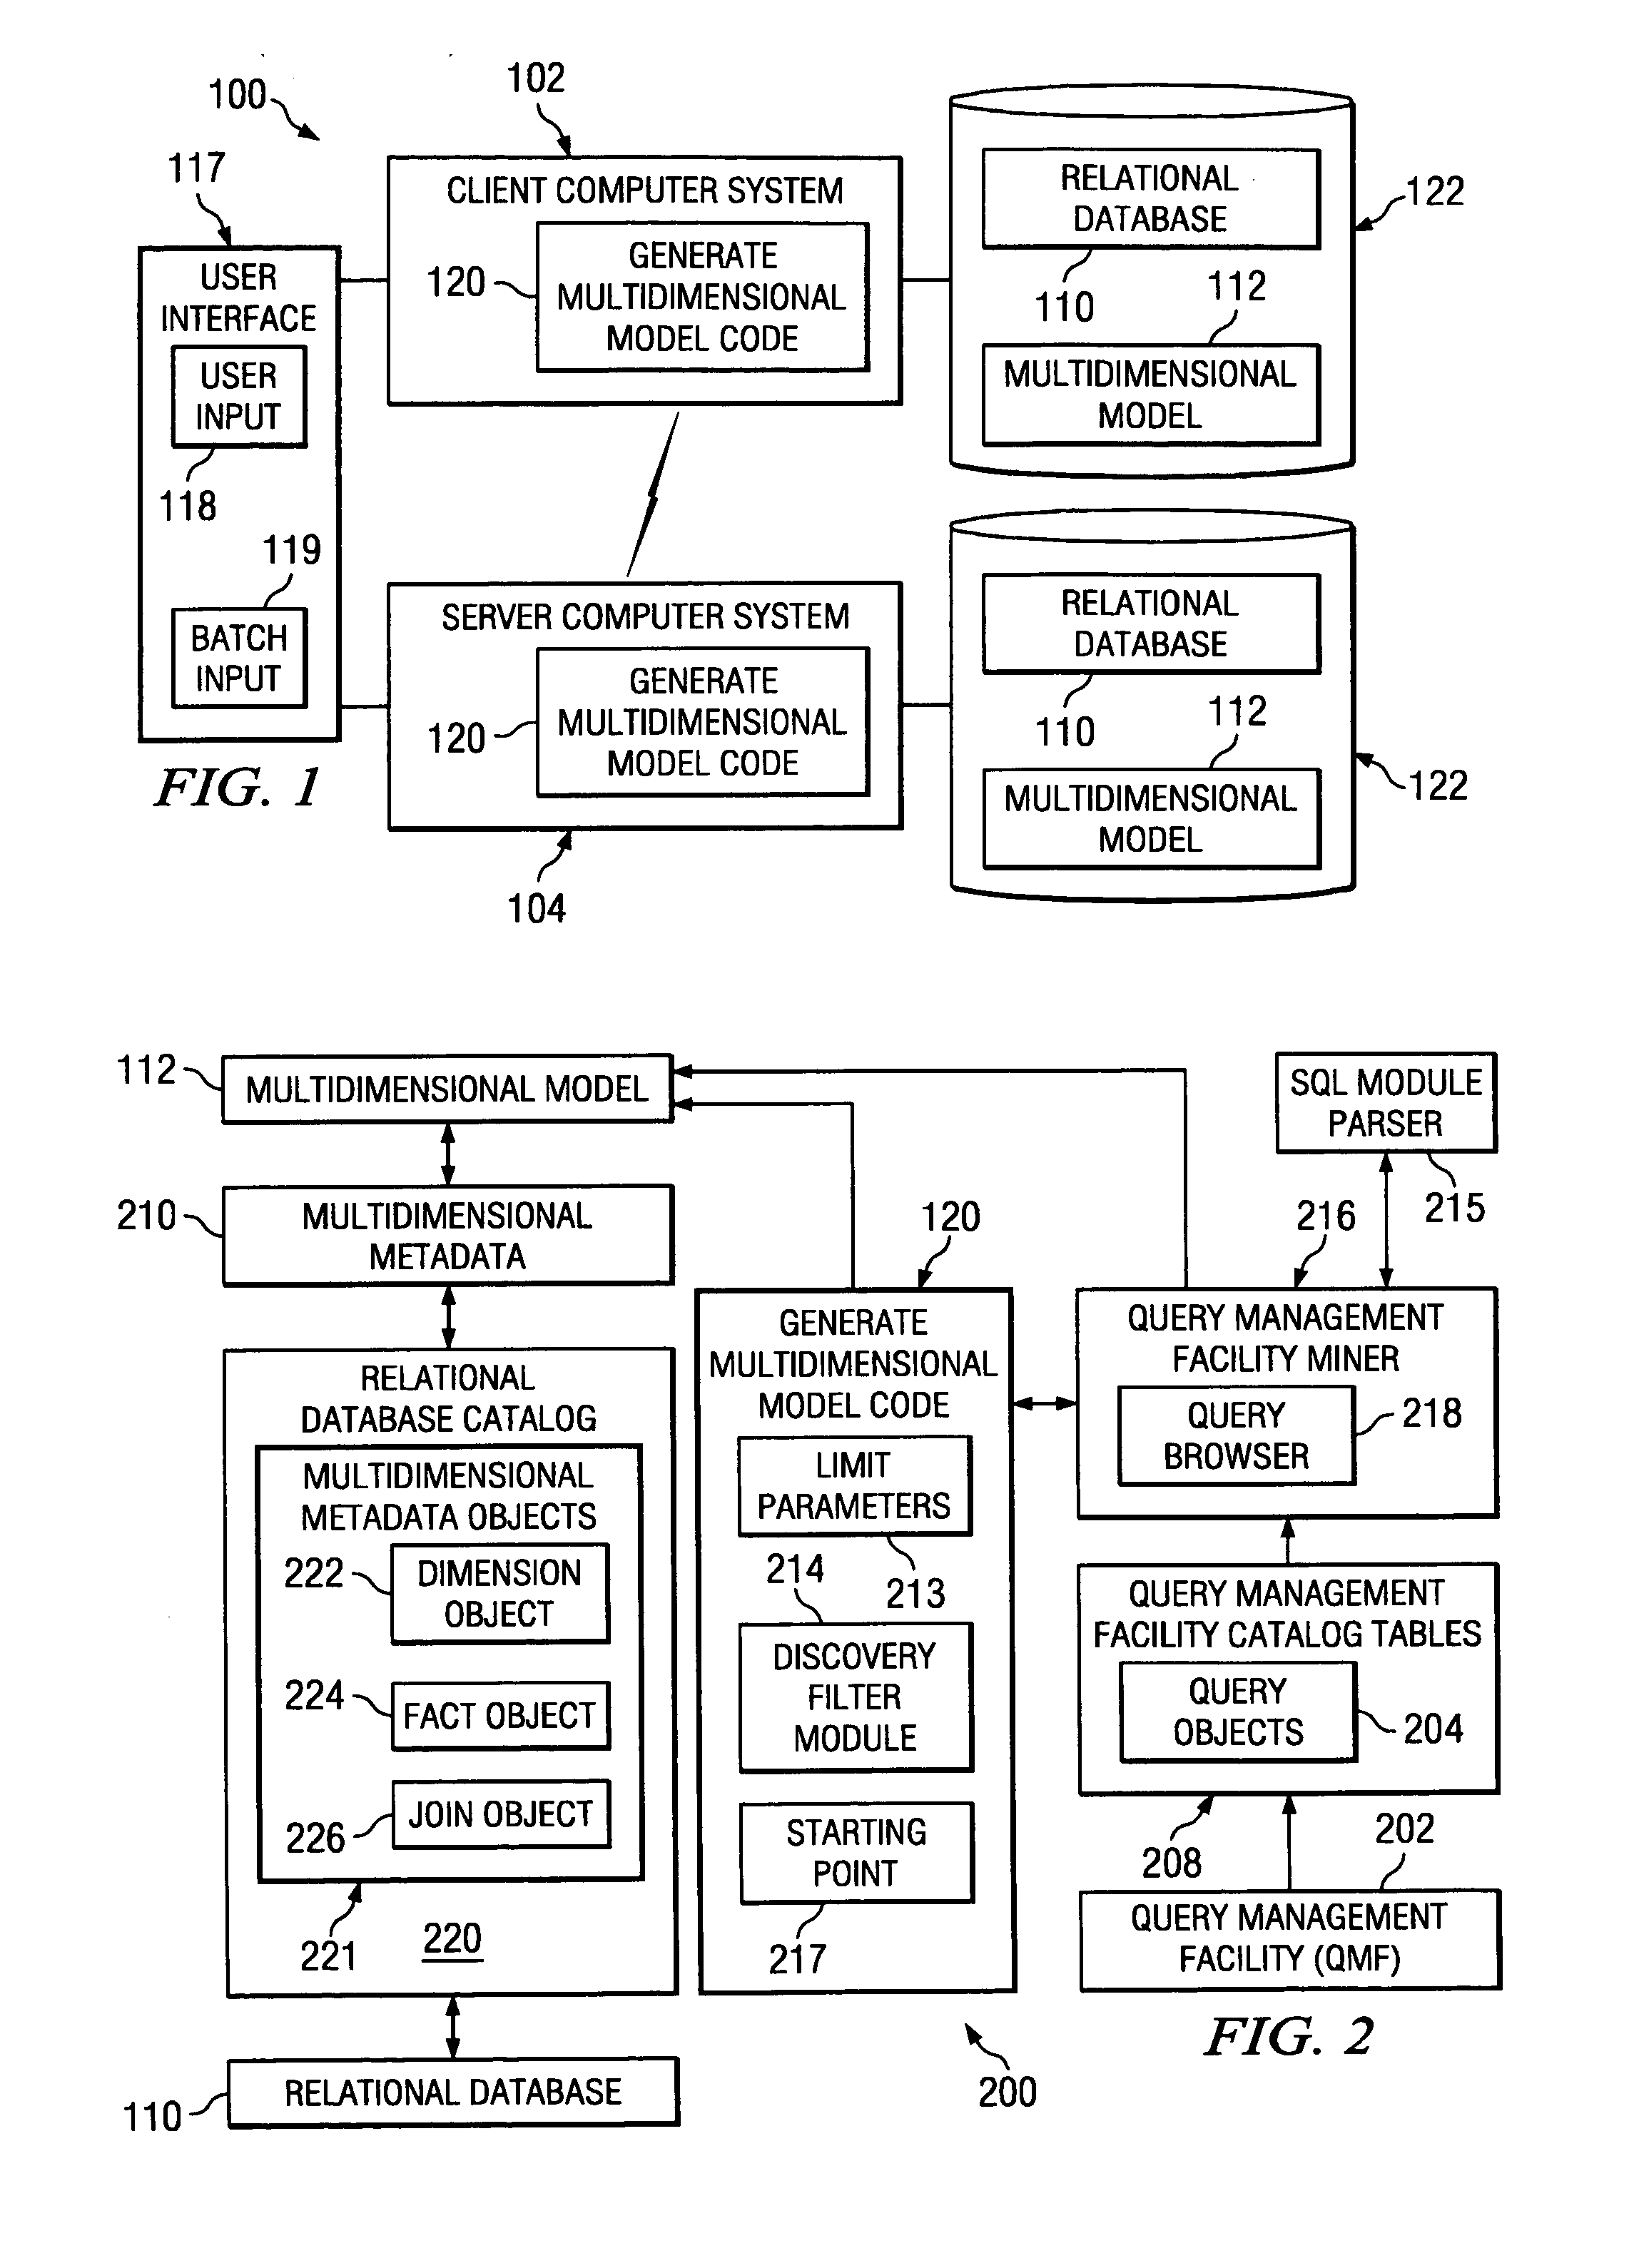 Systems, methods, and computer program products that automatically discover metadata objects and generate multidimensional models